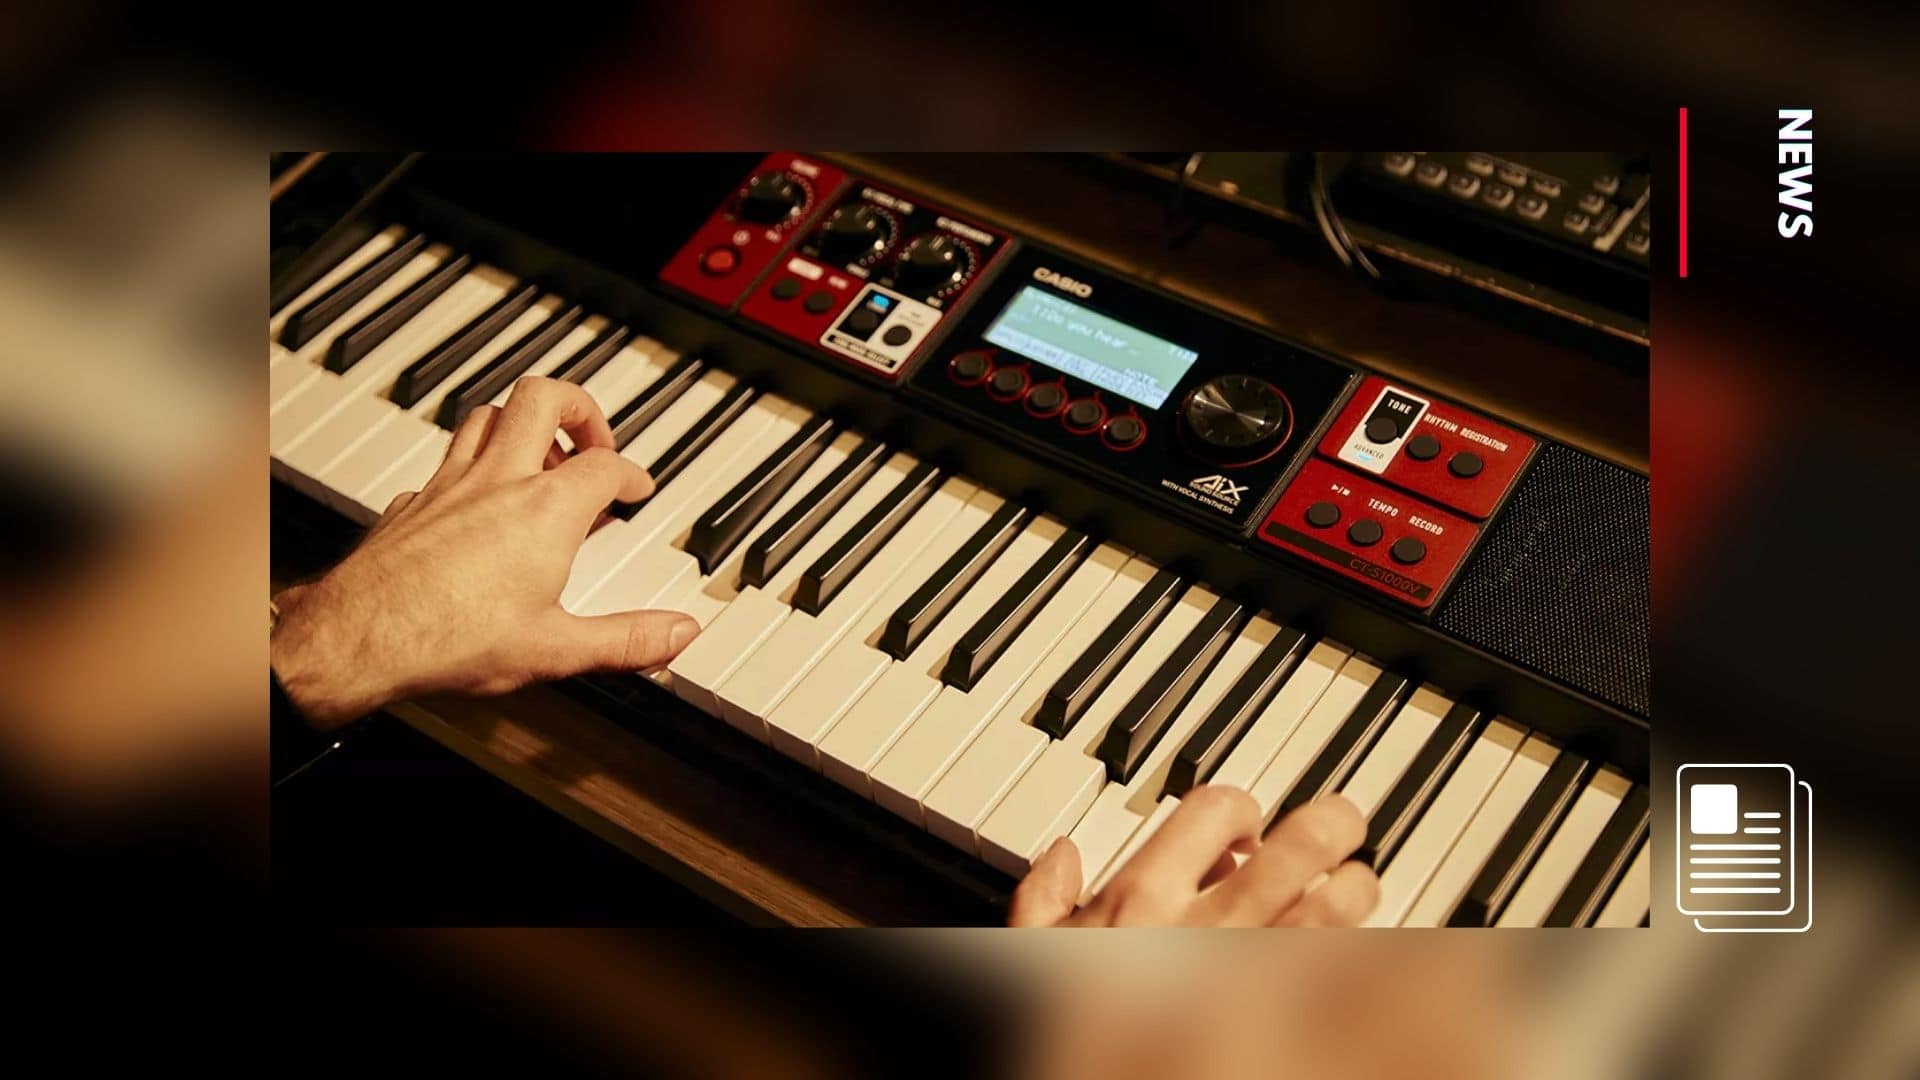 Casio release CT- S1000V Vocal Synth and CT-S500 Keyboard